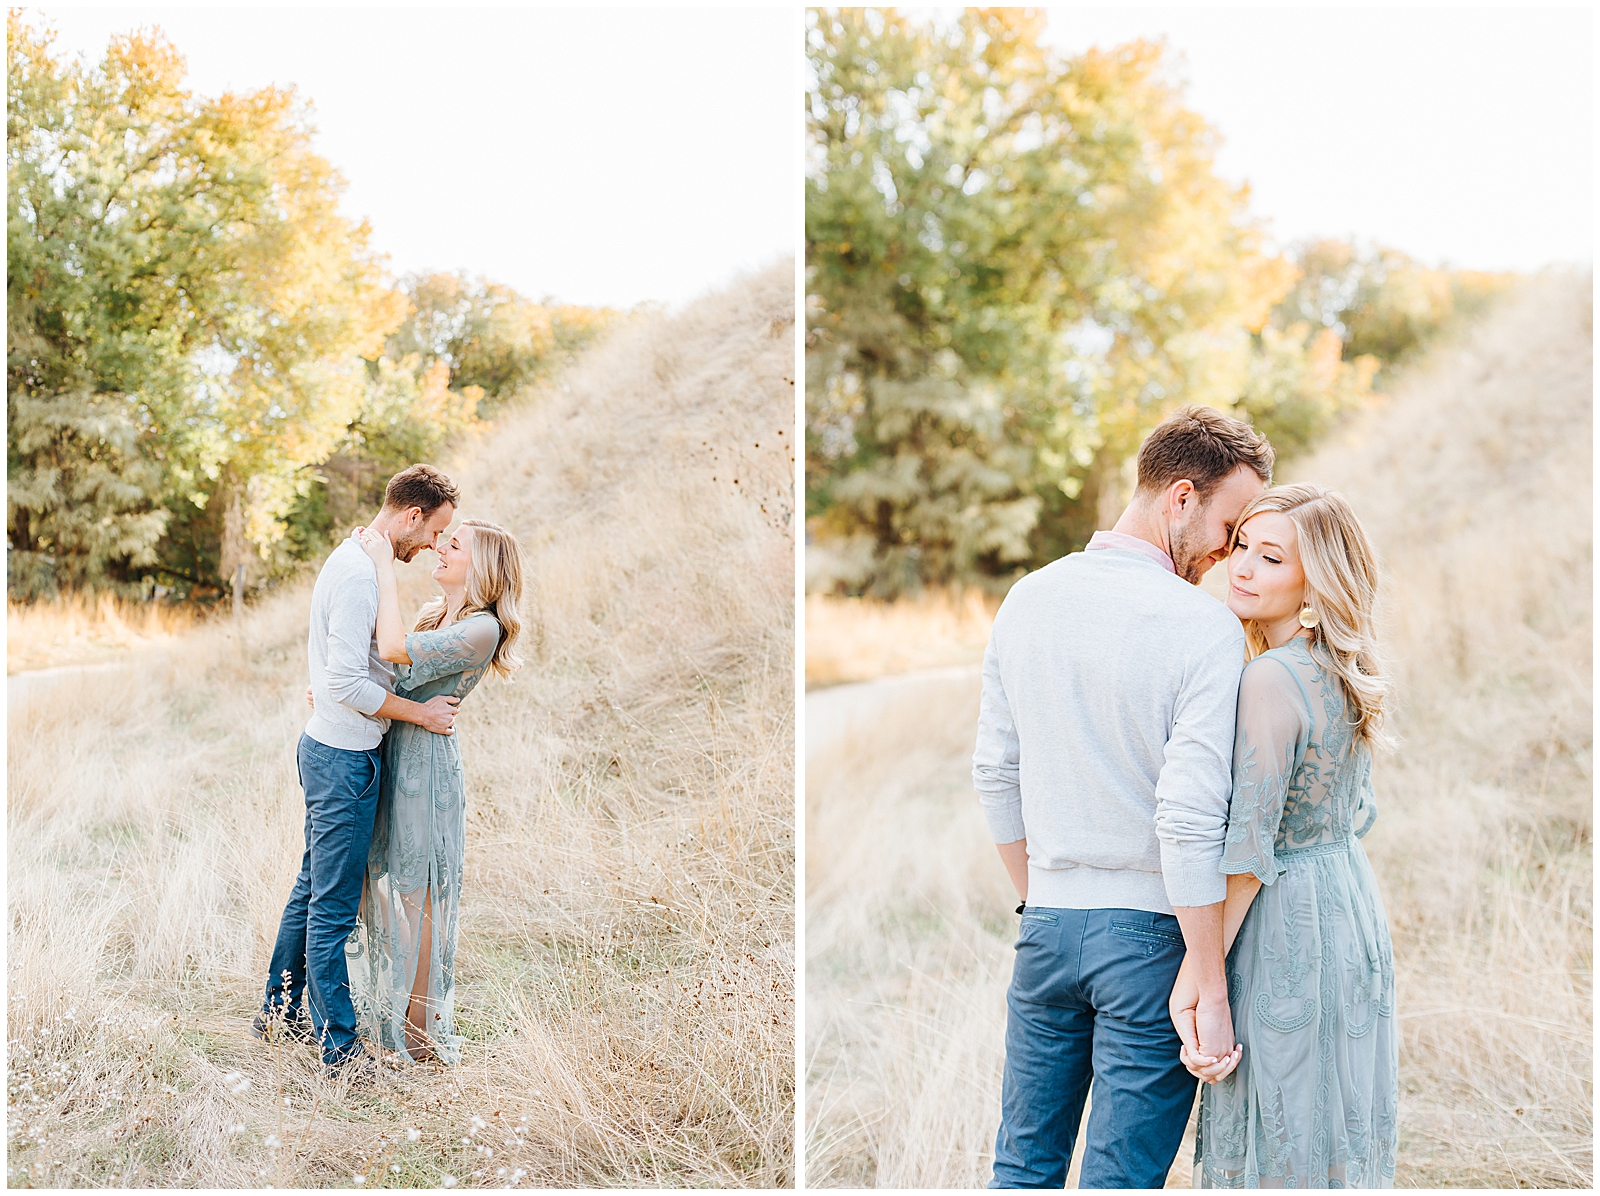 Dreamy Engagement Session in Boise Idaho with blue lacy dress